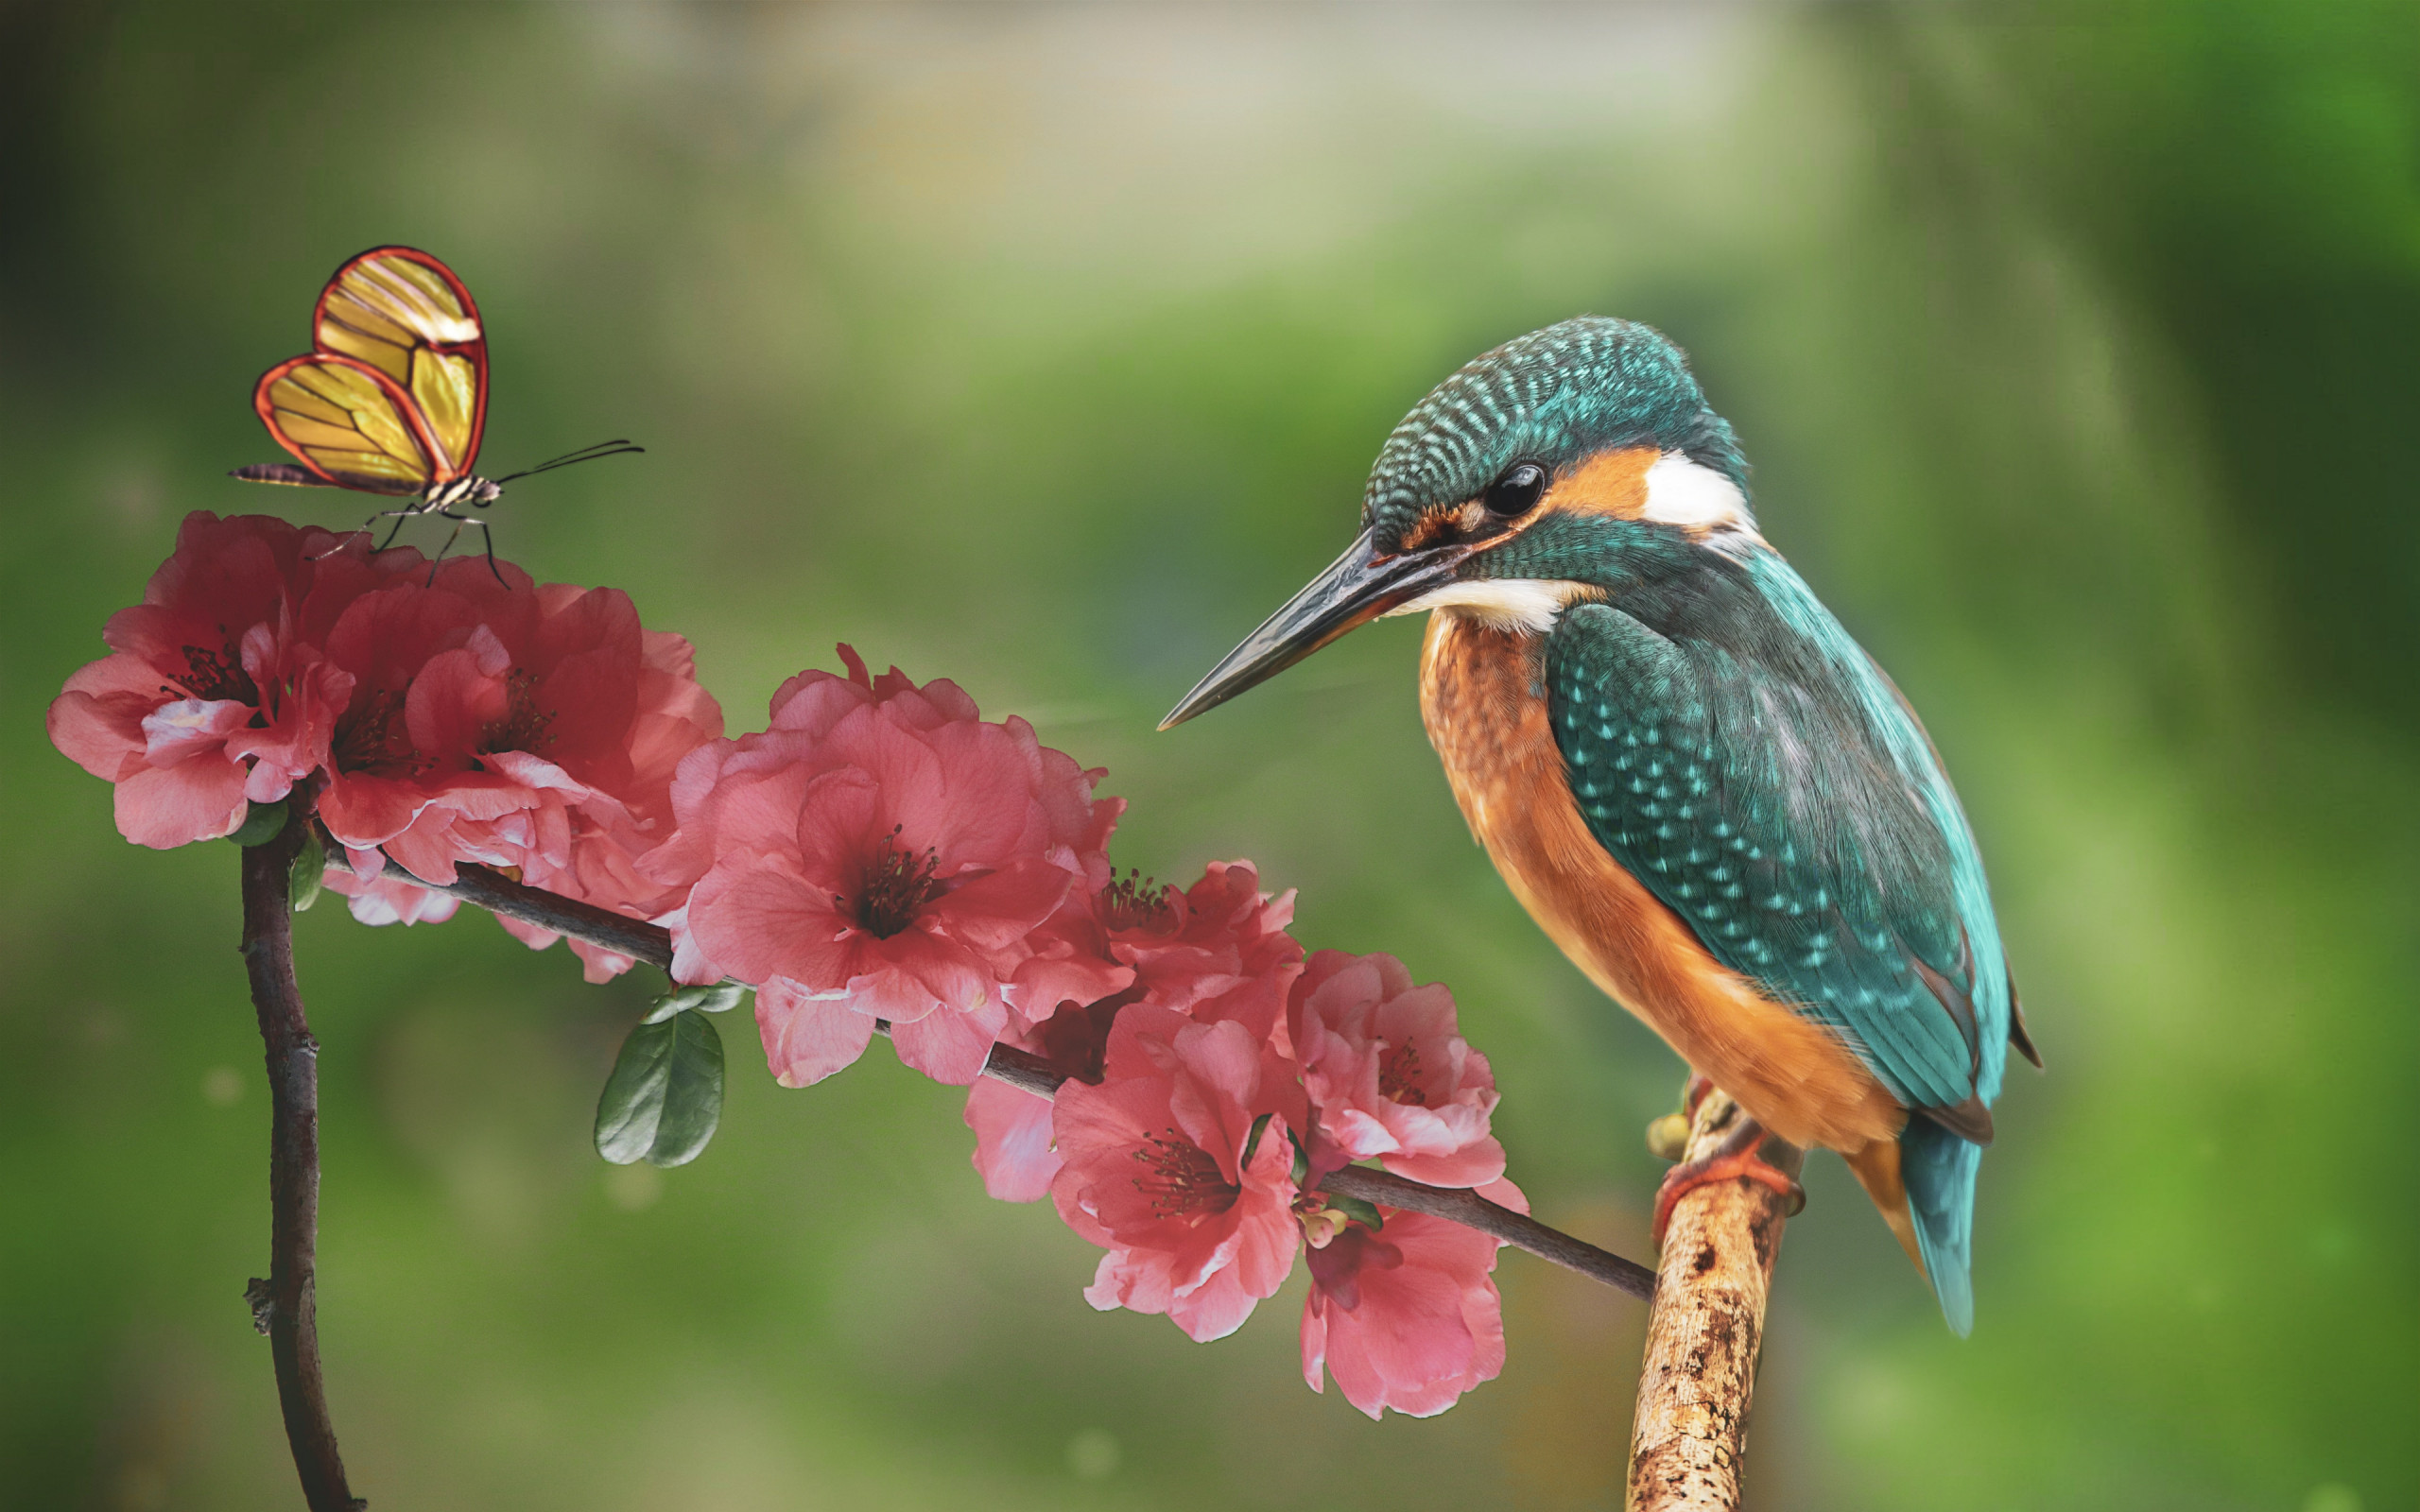 Kingfisher and the butterfly wallpaper 2560x1600